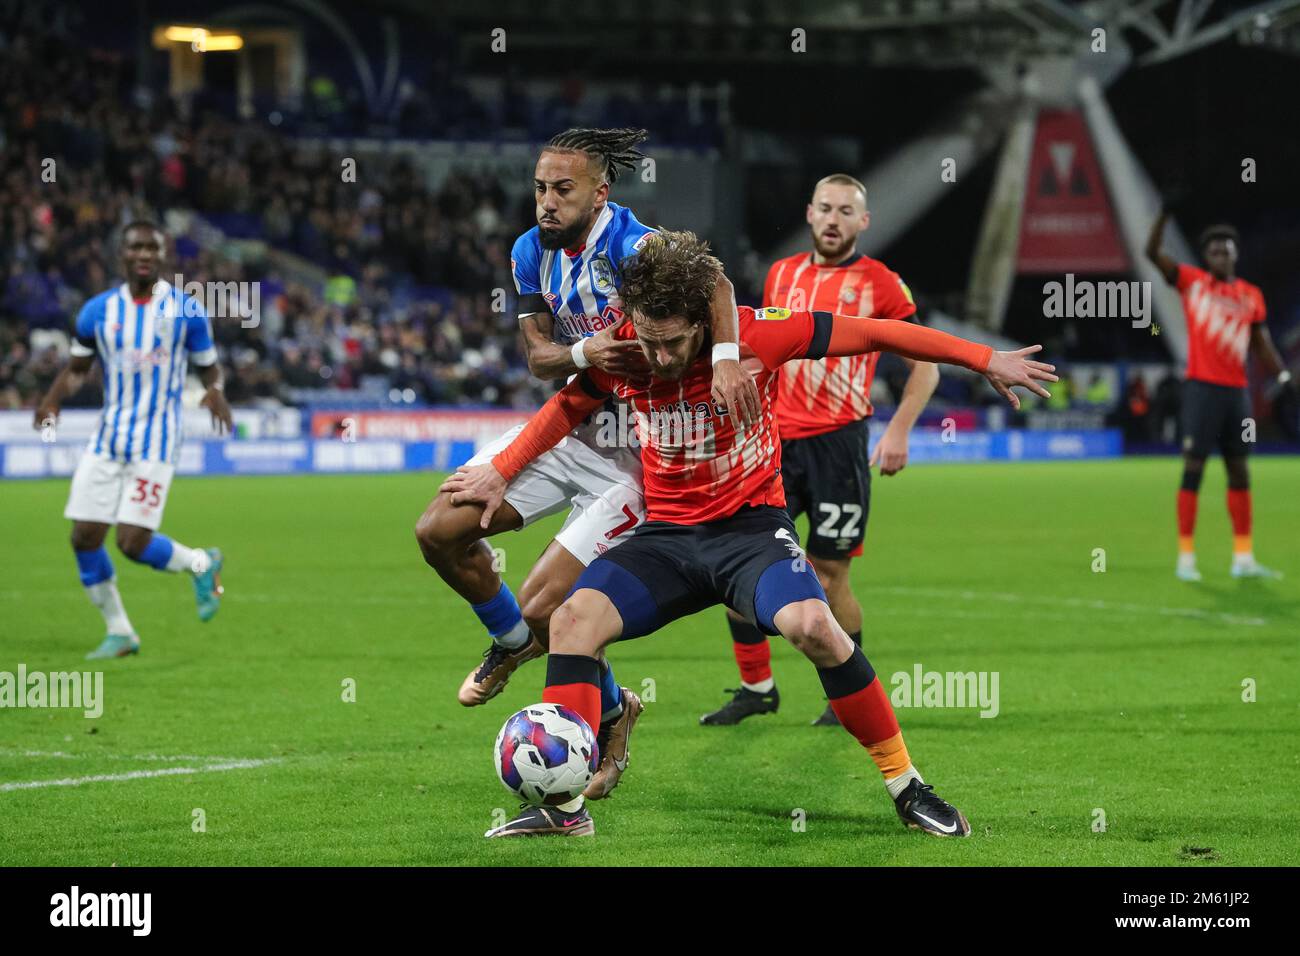 Sorba Thomas #7 of Huddersfield Town and Tom Lockyer #4 of Luton Town tussle for the ball during the Sky Bet Championship match Huddersfield Town vs Luton Town at John Smith's Stadium, Huddersfield, United Kingdom, 1st January 2023  (Photo by James Heaton/News Images) Stock Photo